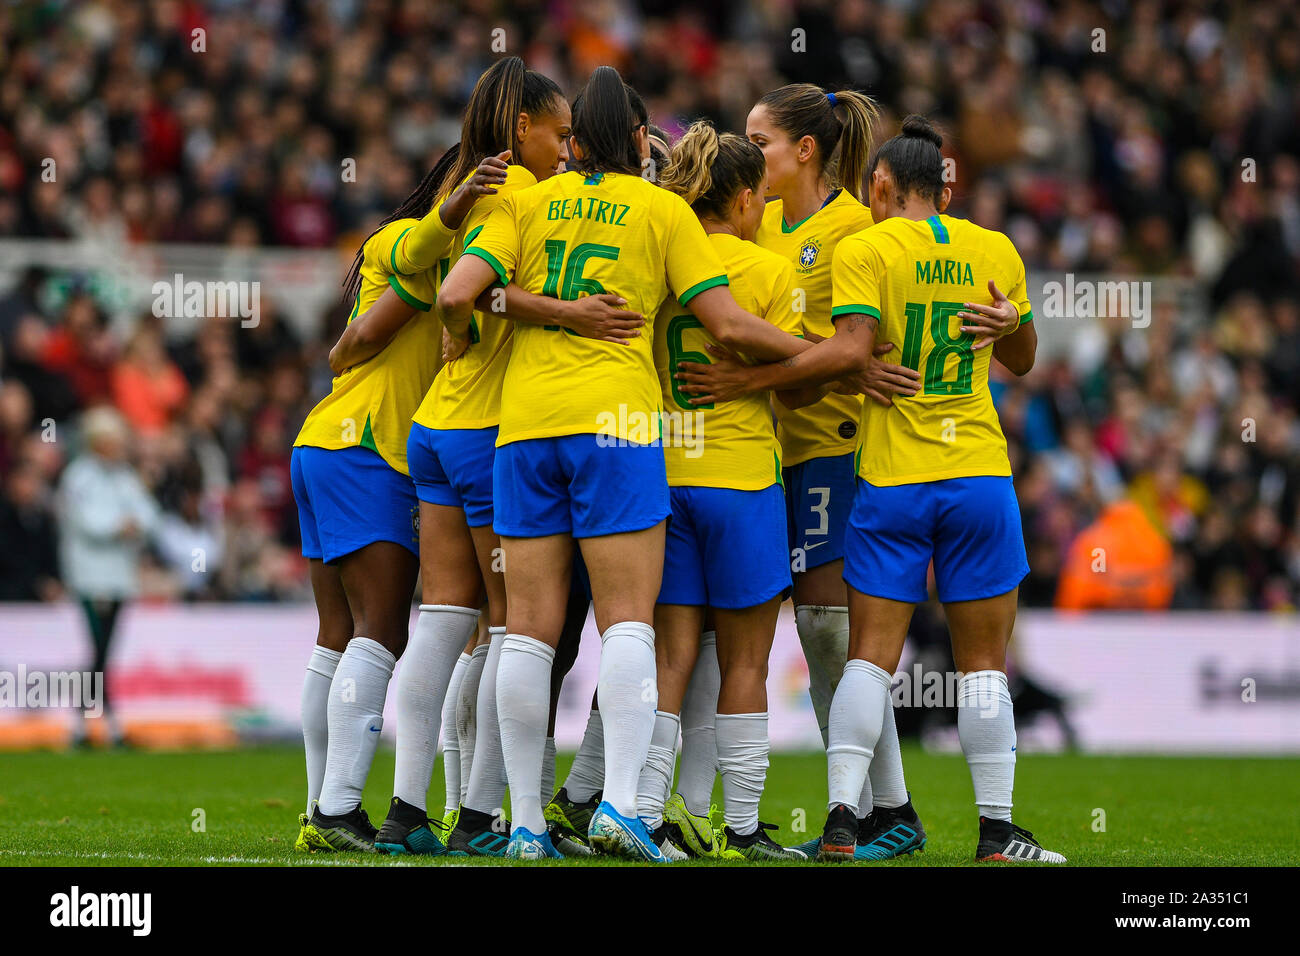 Middlesbrough, UK. 05th Oct, 2019. MIDDLESBROUGH, ENGLAND OCTOBER 5TH The Brazil Women, team celebrate after Oliveira Debora of Brazil Women scores a goal during the International Friendly match between England Women and Brazil Women at the Riverside Stadium, Middlesbrough on Saturday 5th October 2019.( Credit: Iam Burn | MI News) Photograph may only be used for newspaper and/or magazine editorial purposes, license required for commercial use Credit: MI News & Sport /Alamy Live News Stock Photo